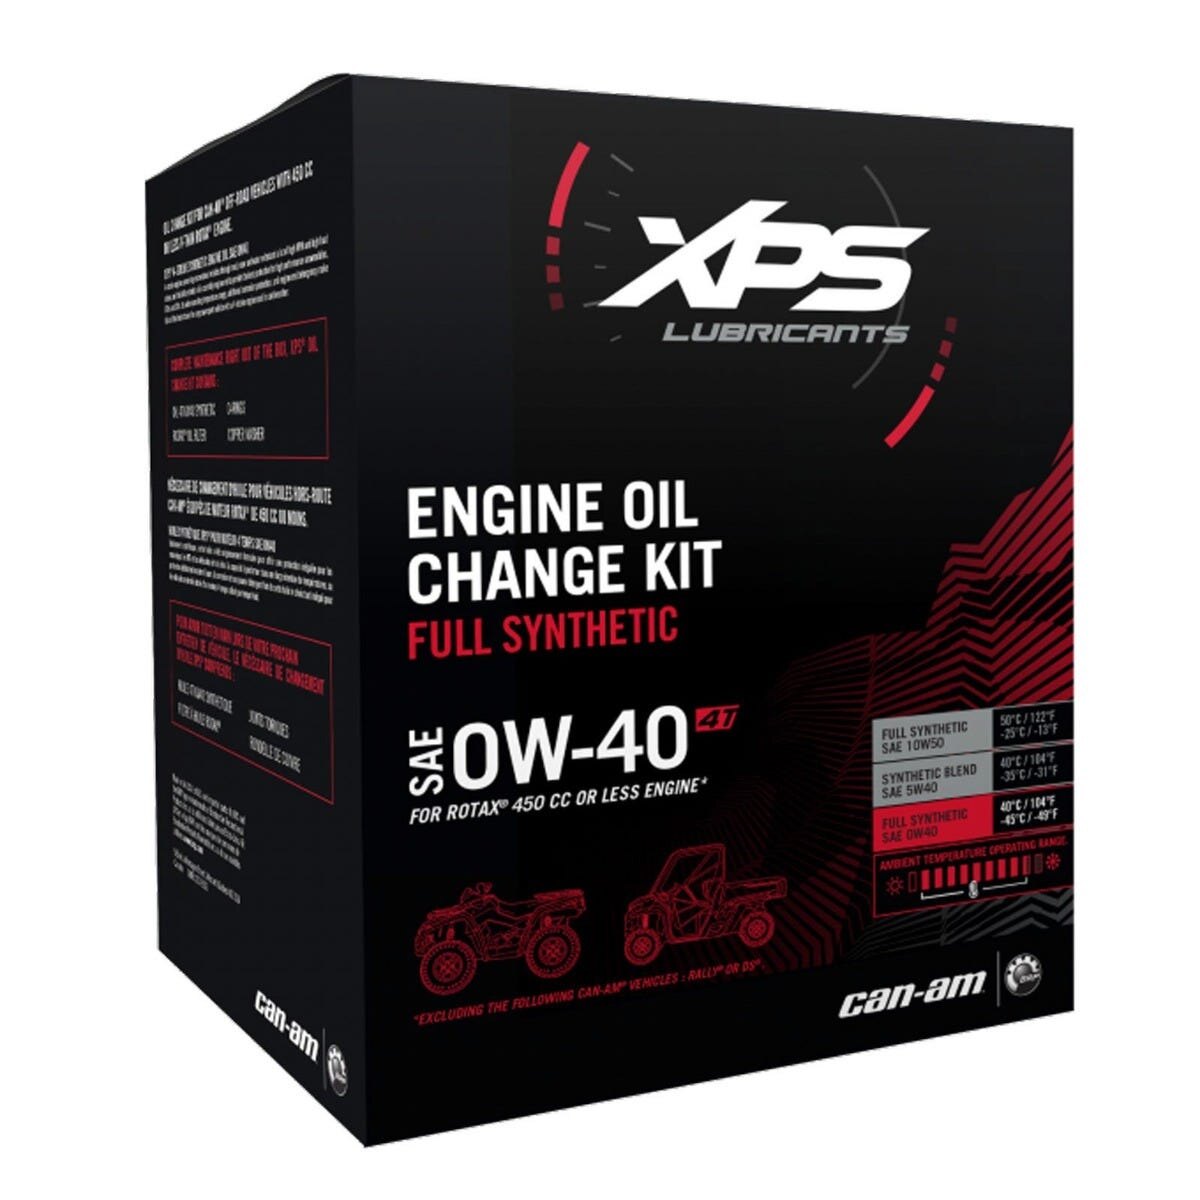 0W 40 Synthetic Oil Change Kit for Can Am ATV/SSV Rotax 450 cc or Smaller Engines